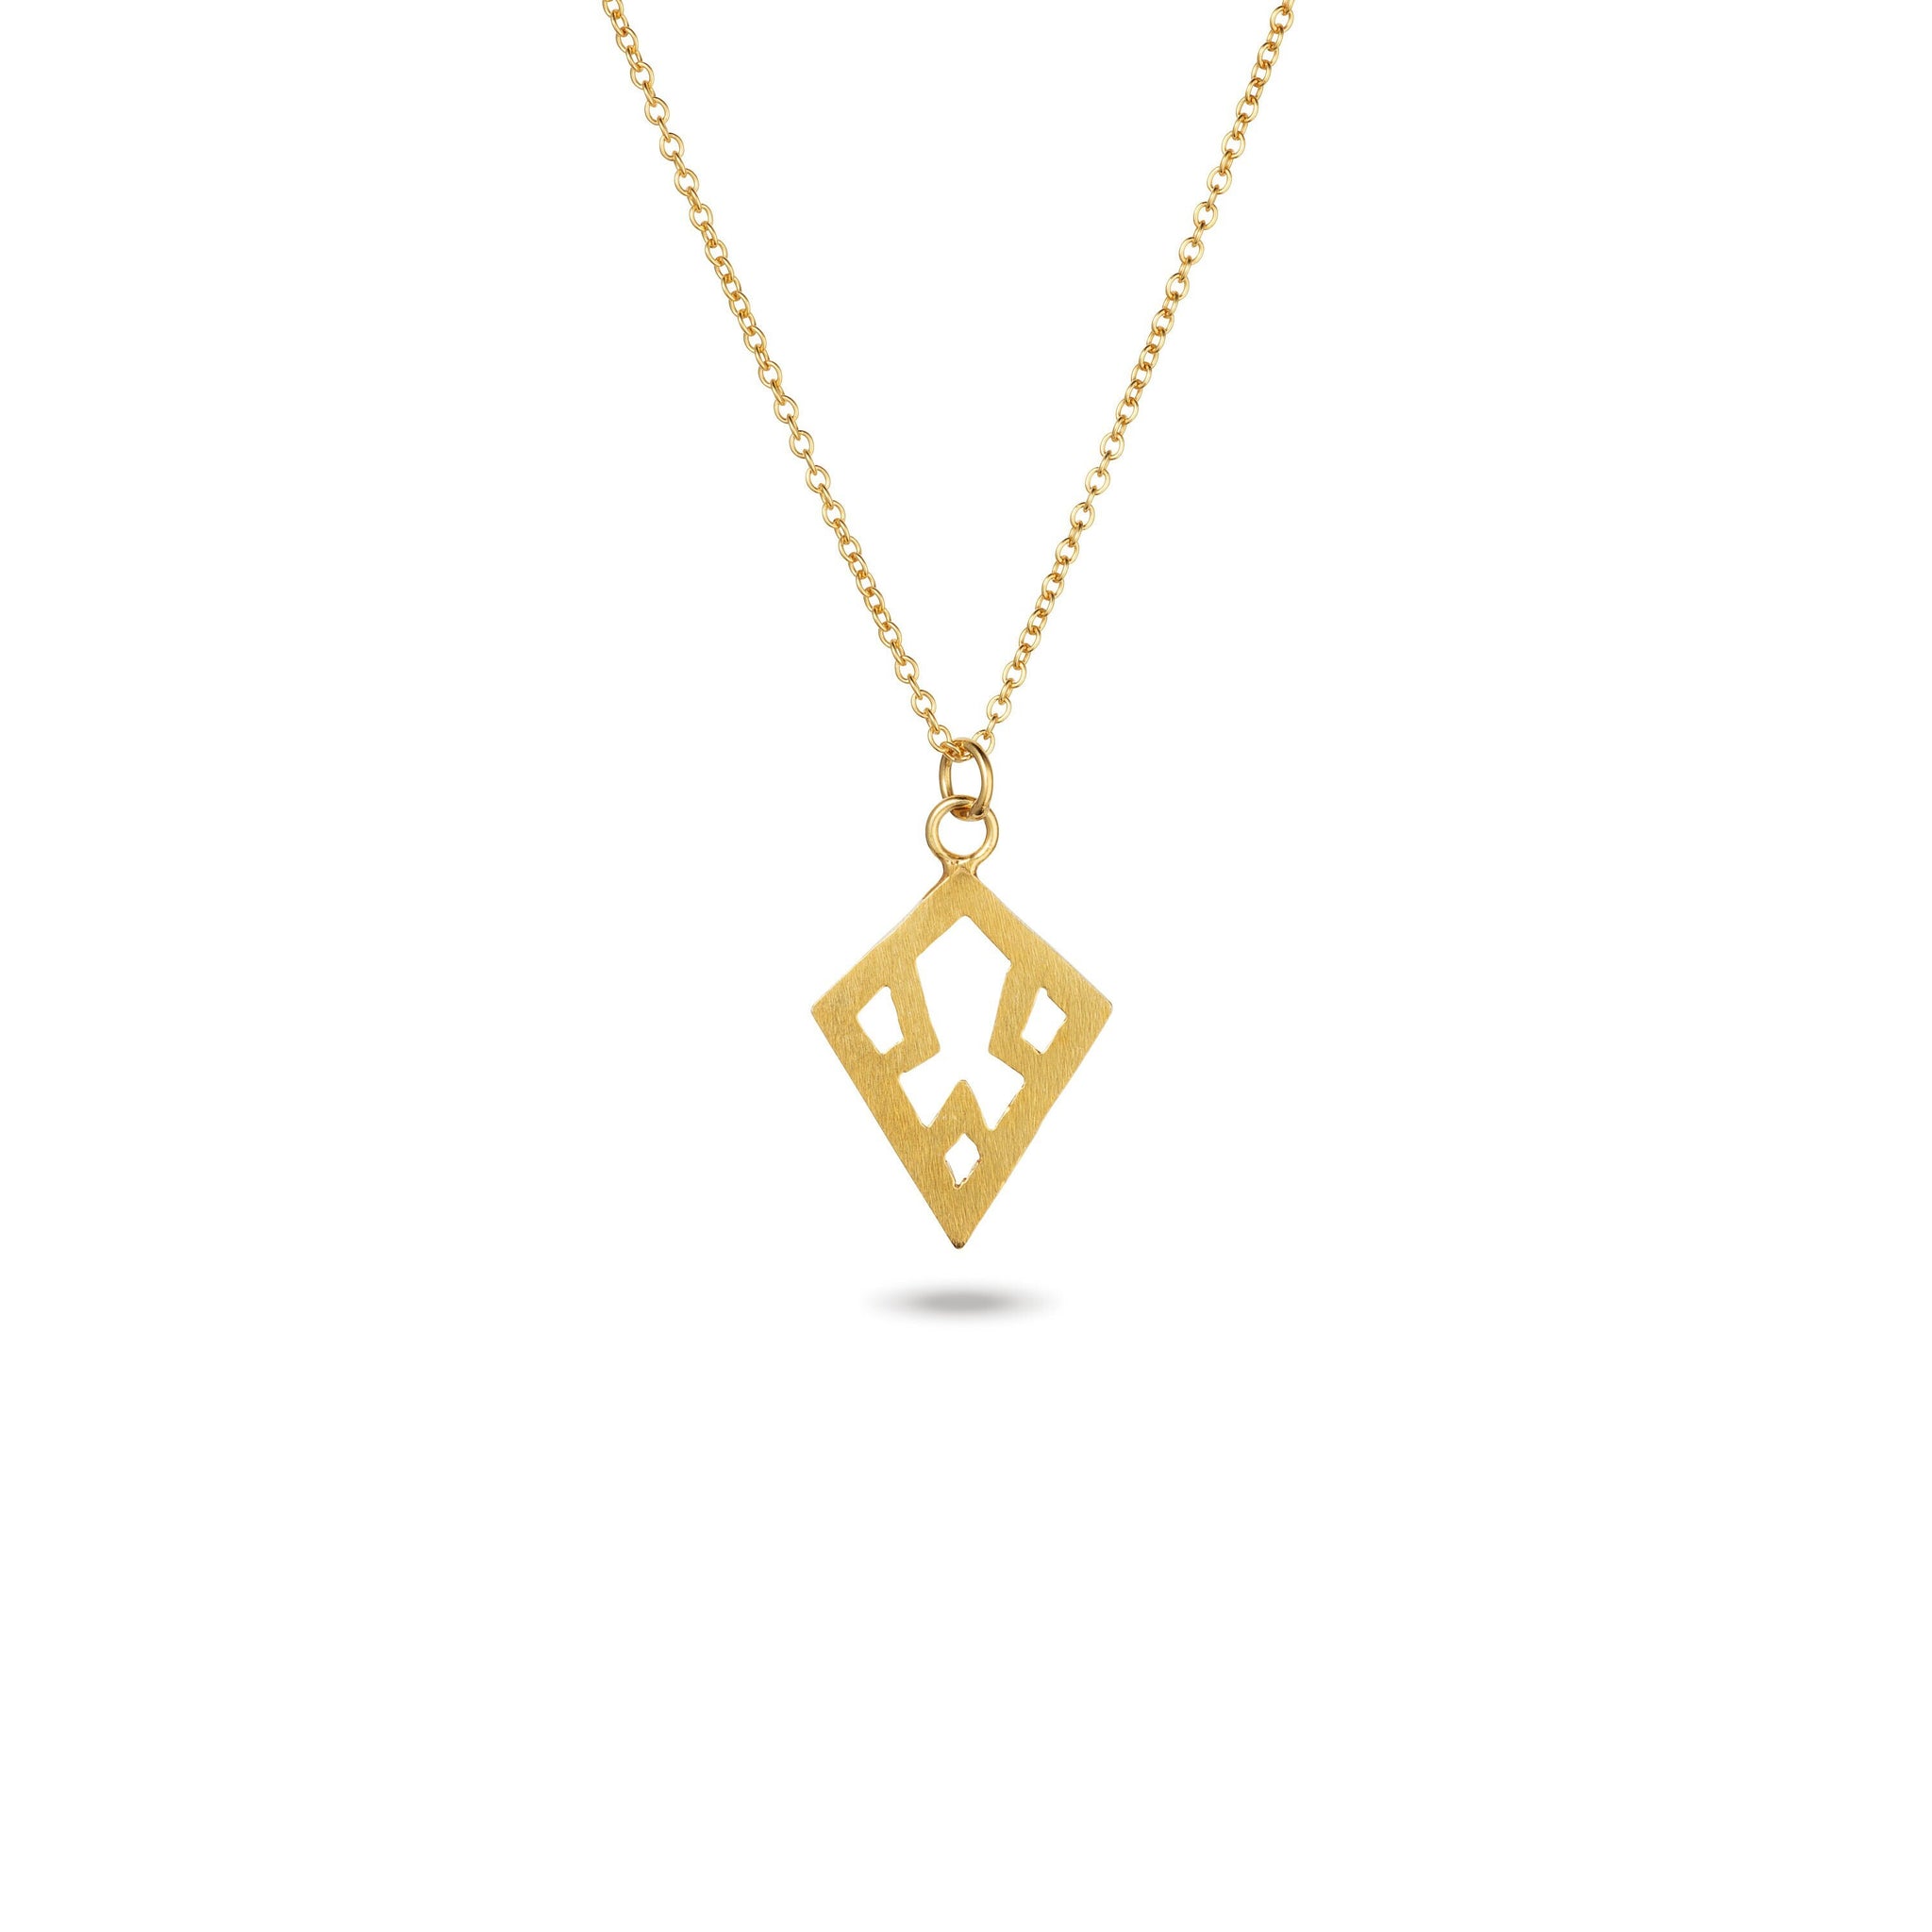 Handmade Afghan Gold Plated Brass Chain Pendant Necklace Elegant Inspired Jewelry Rhombus Motif Geometric Abstract Gift for Her